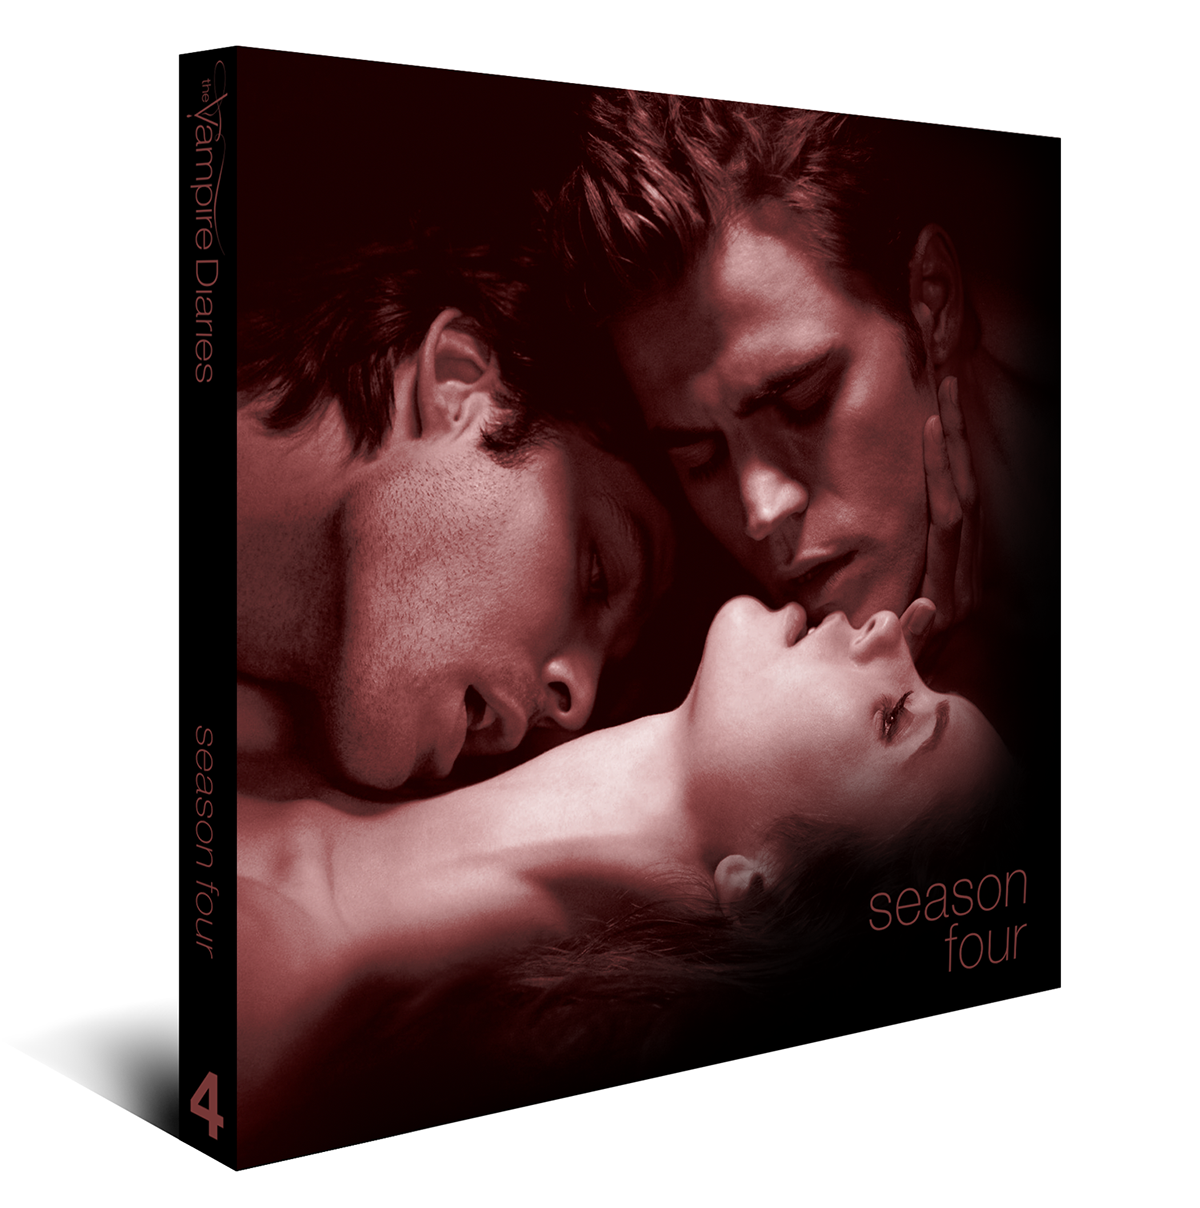 vampire diaries cw WB warner brothers warner bros DVD special edition collector's edition package vampire dark romance fantasy dream